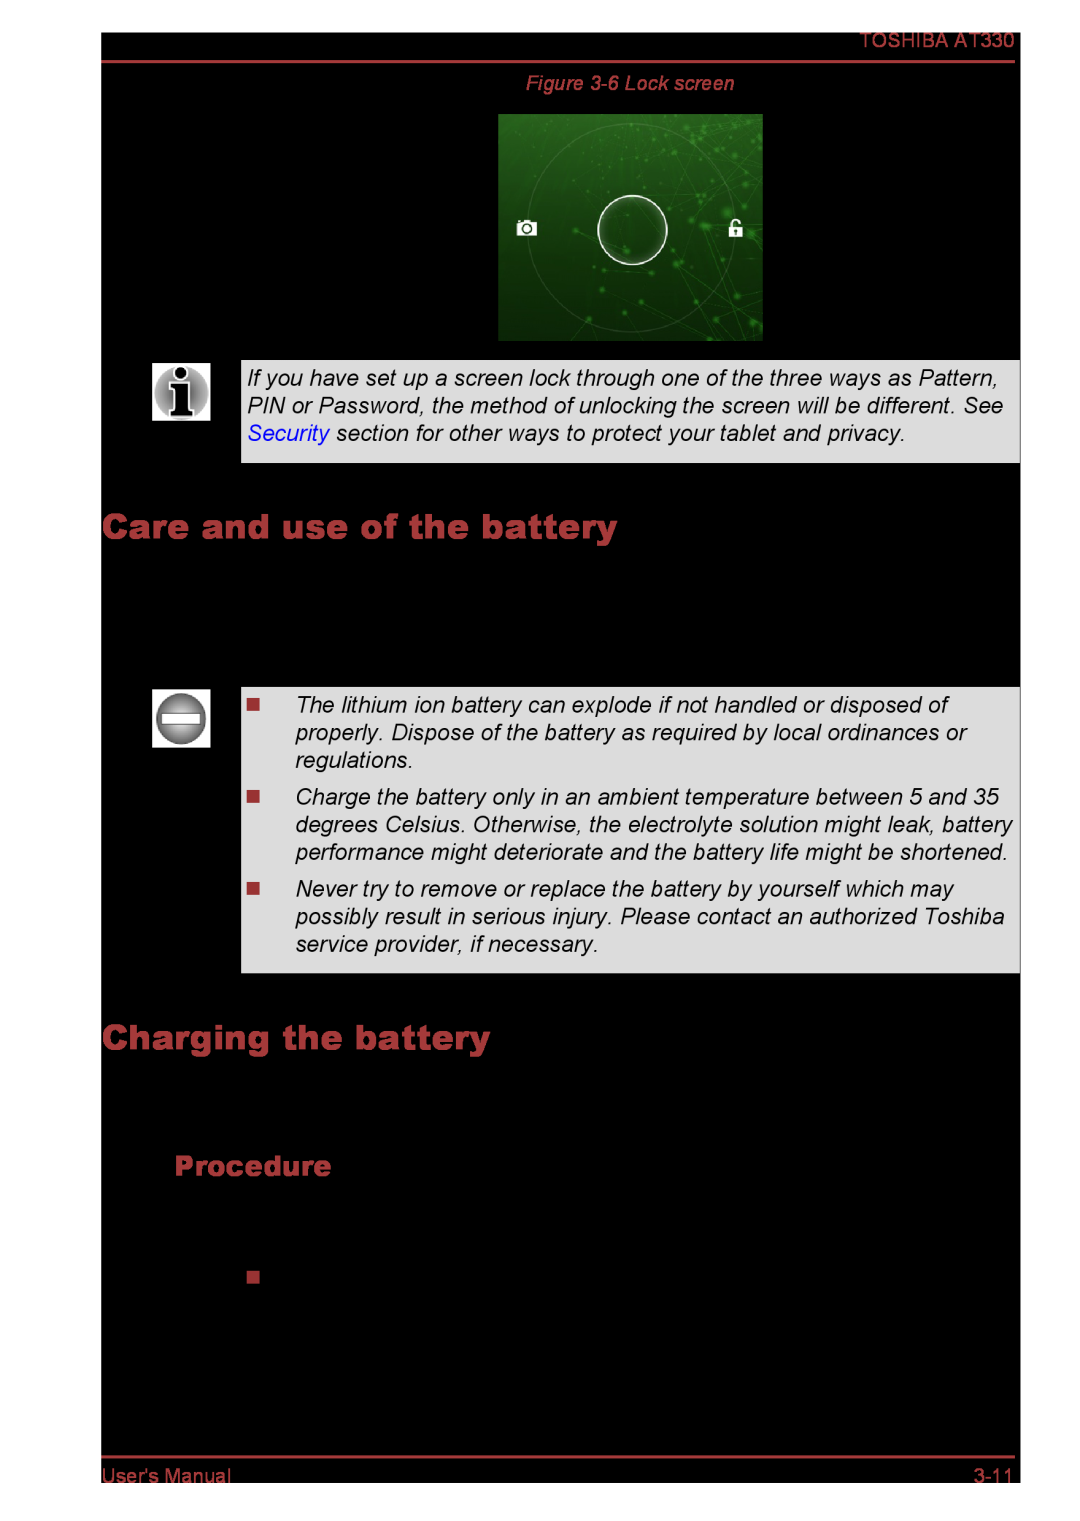 Toshiba at330 user manual Care and use of the battery, Charging the battery, Procedure 